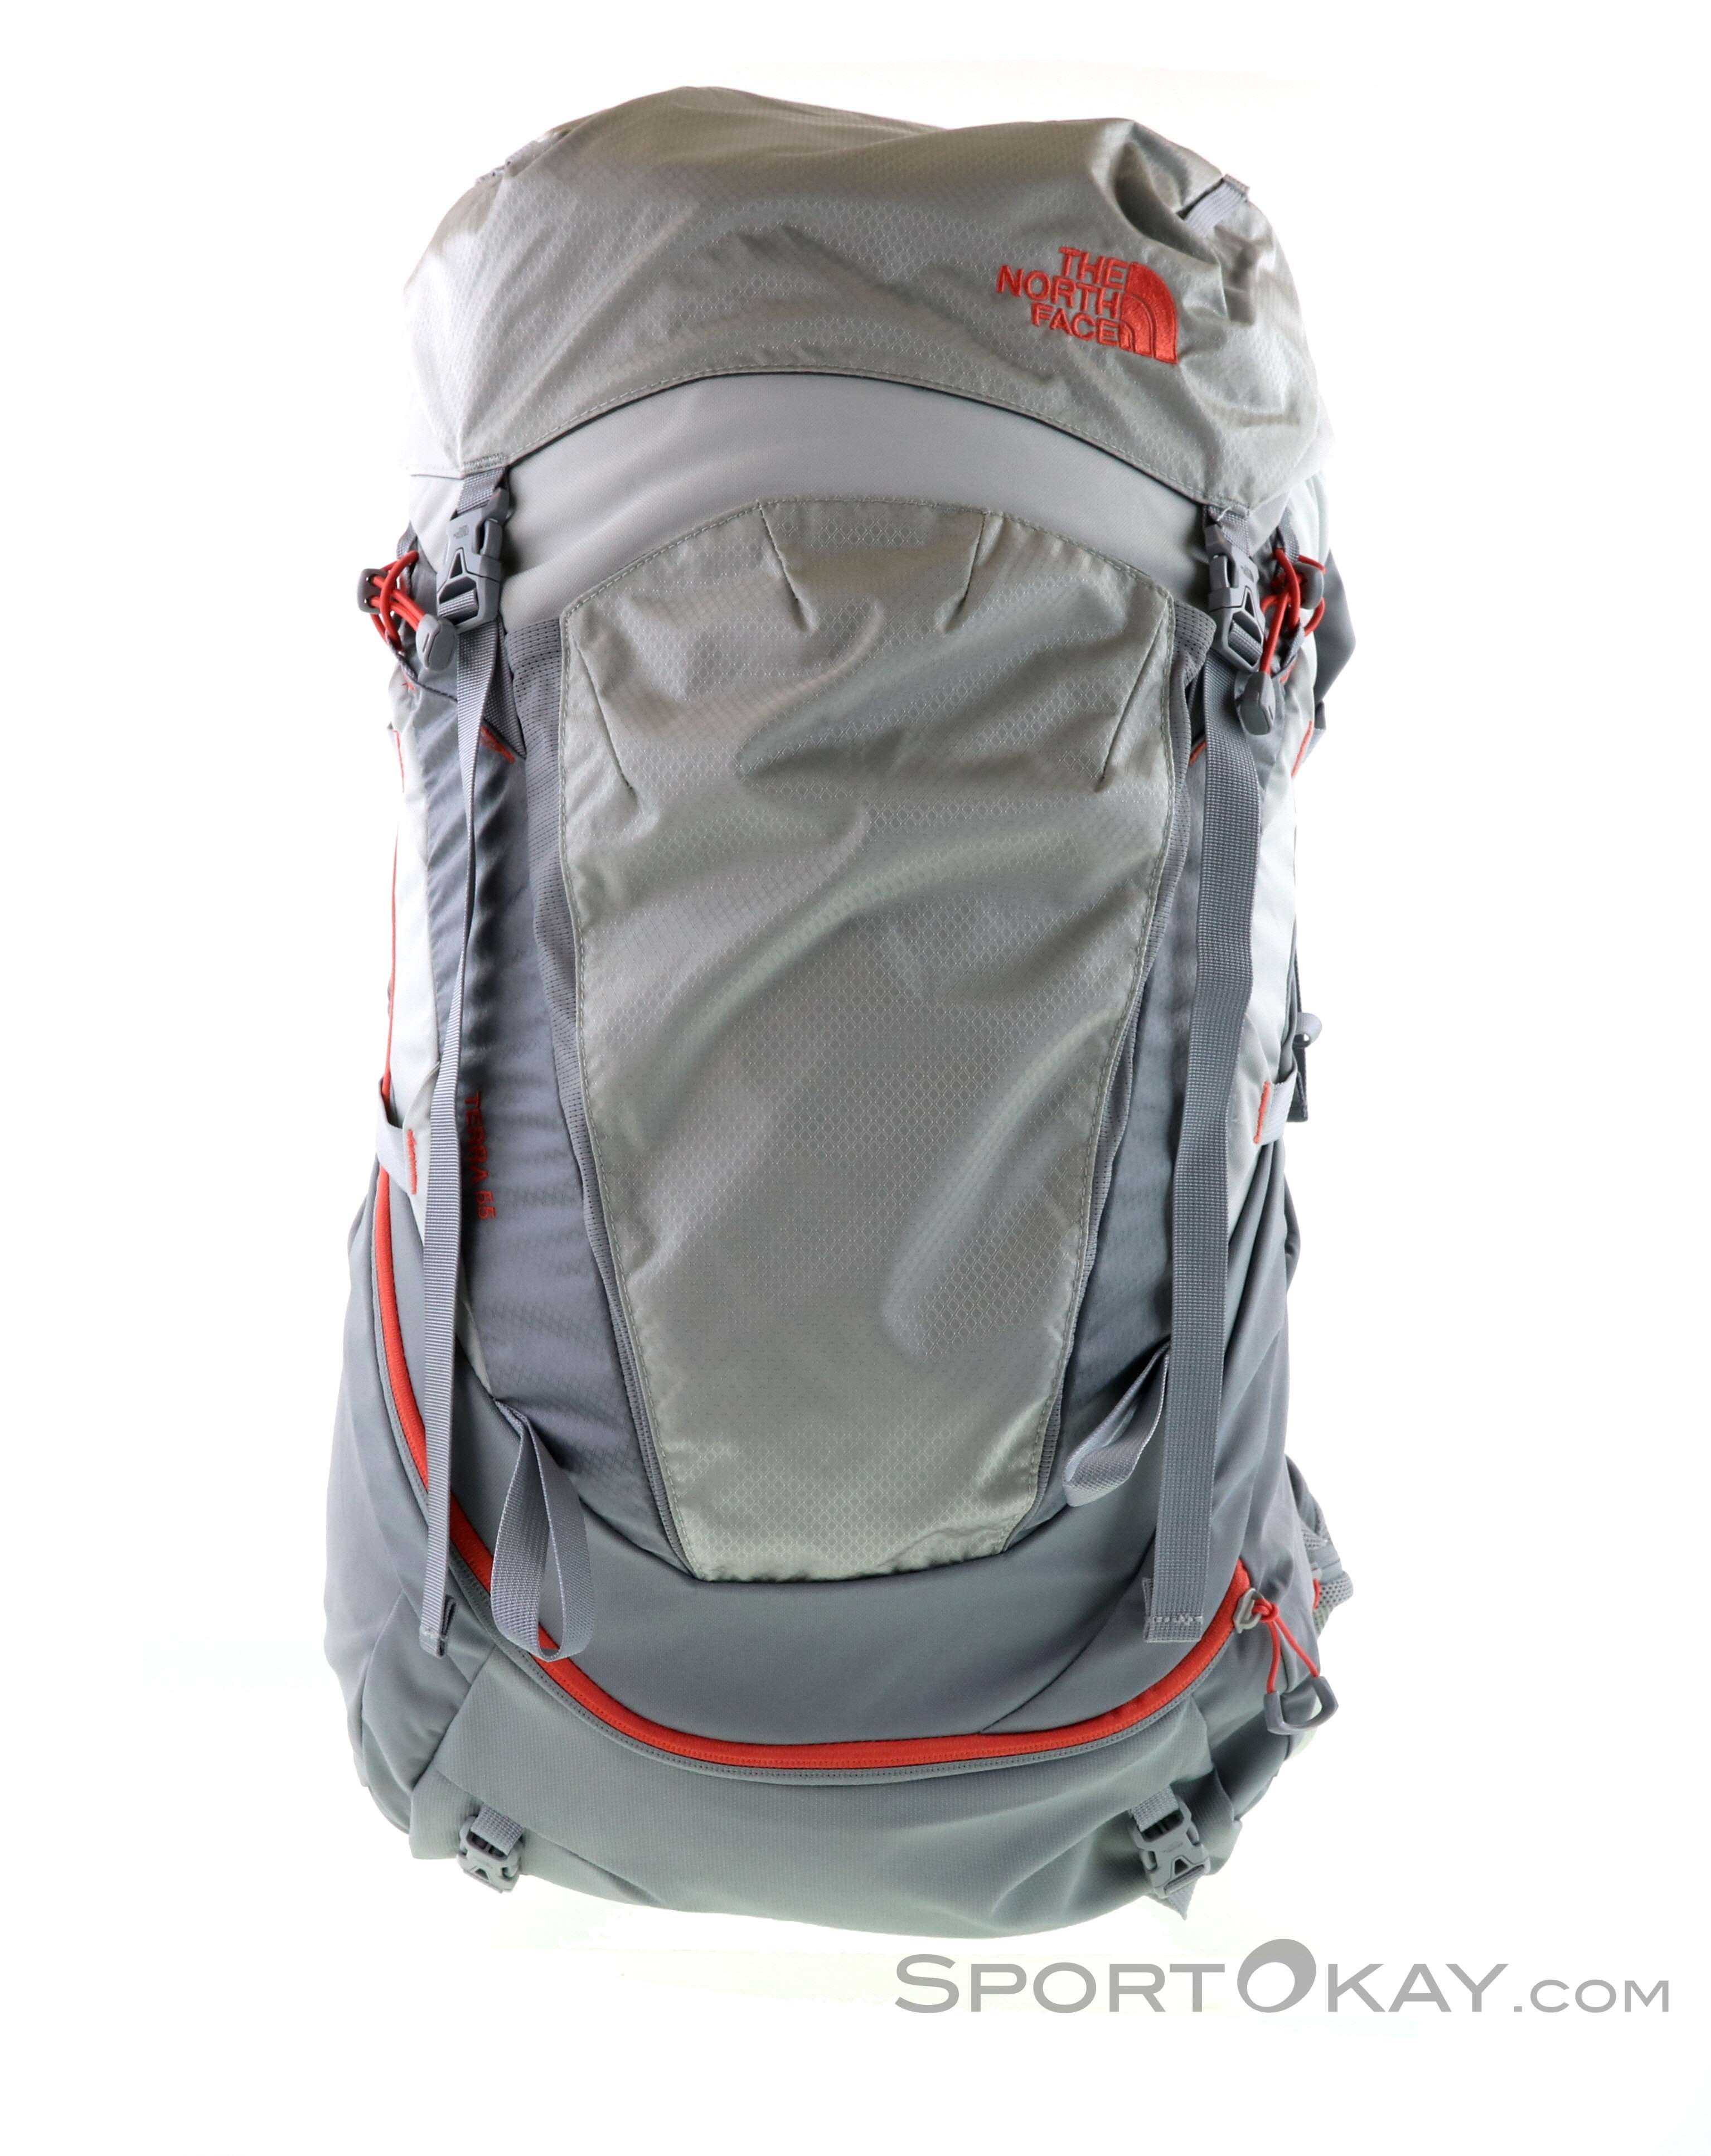 northface womans backpack